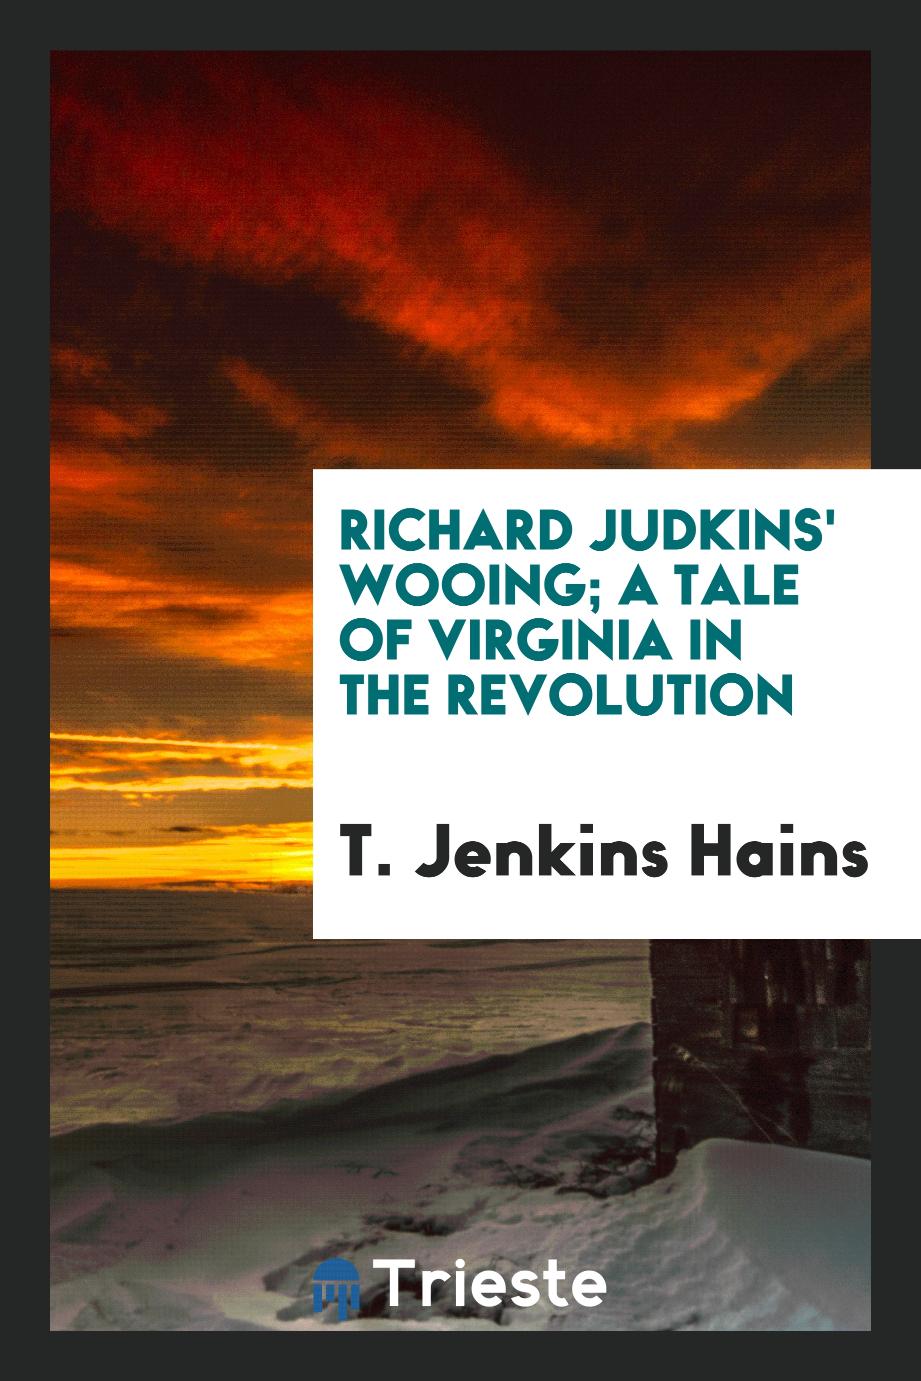 Richard Judkins' wooing; a tale of Virginia in the revolution